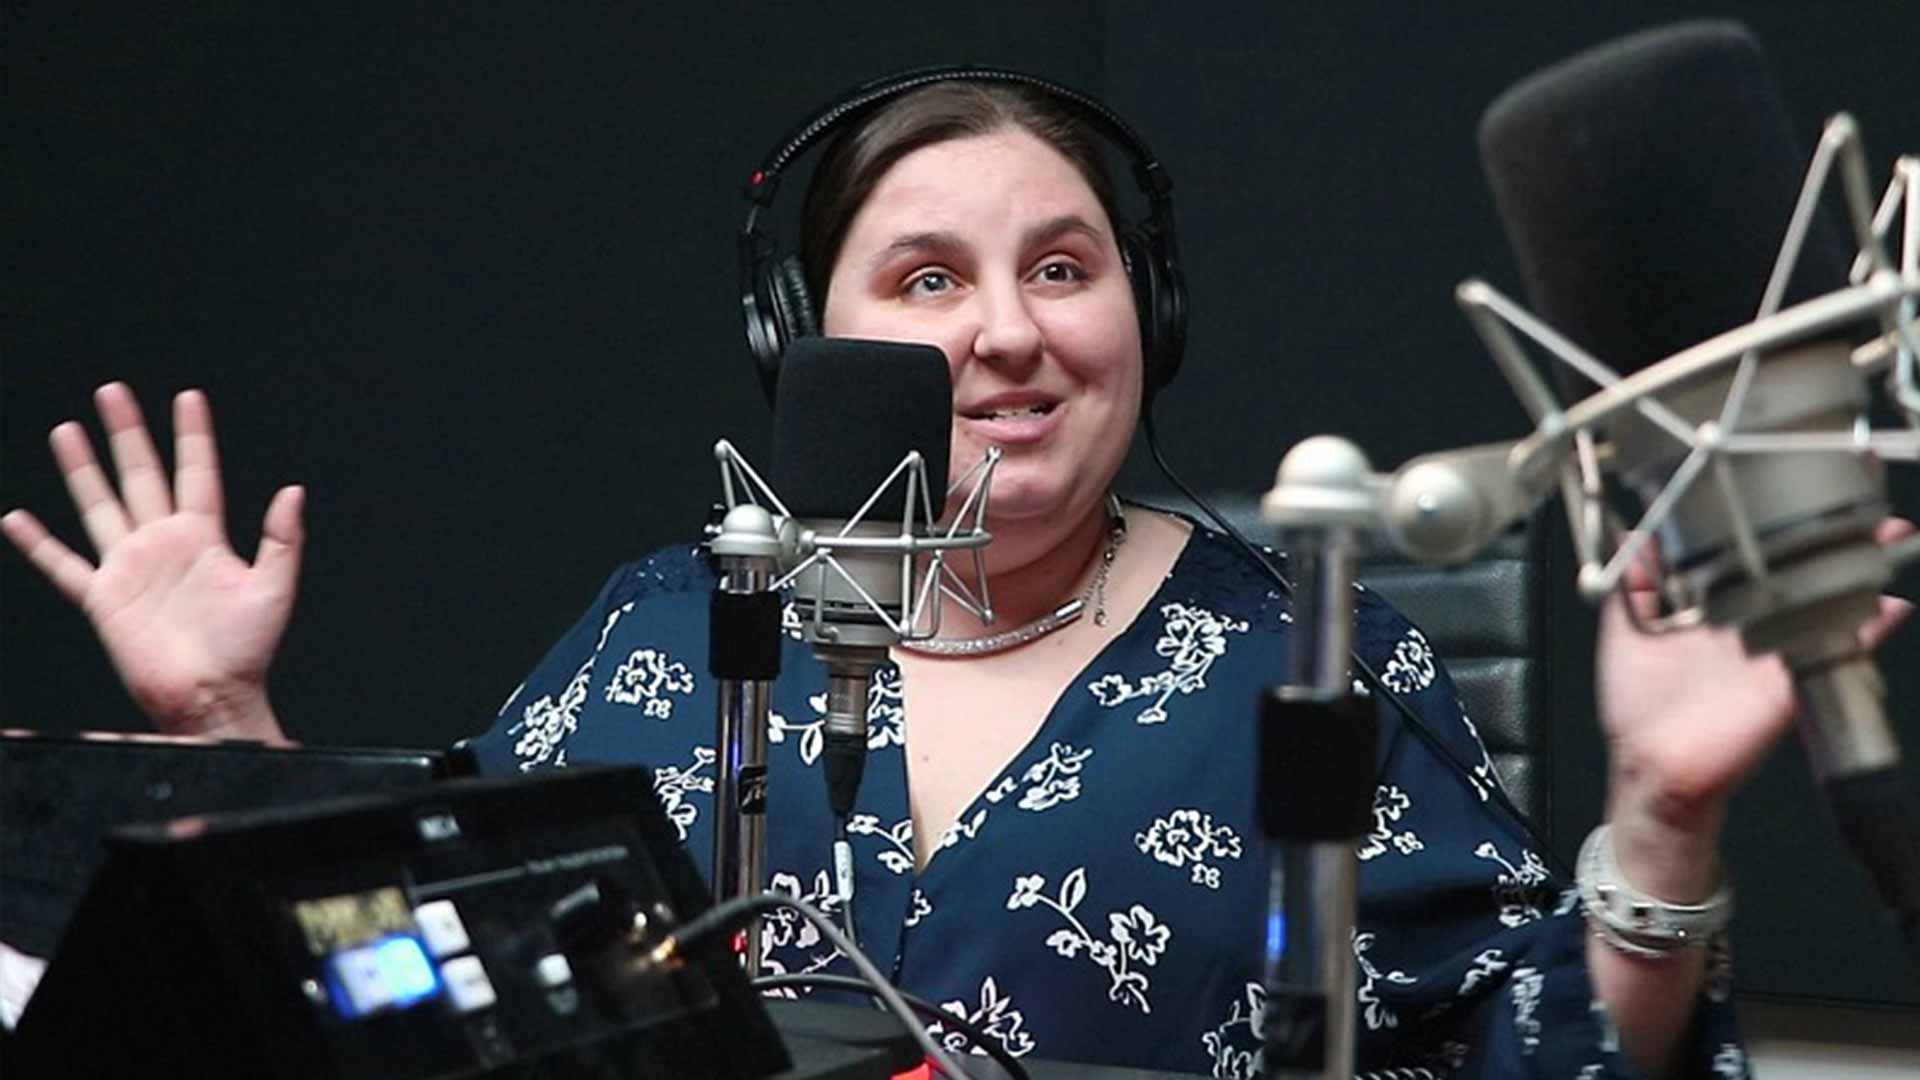 Amy Amantea smiles as she speaks into a radio microphone.